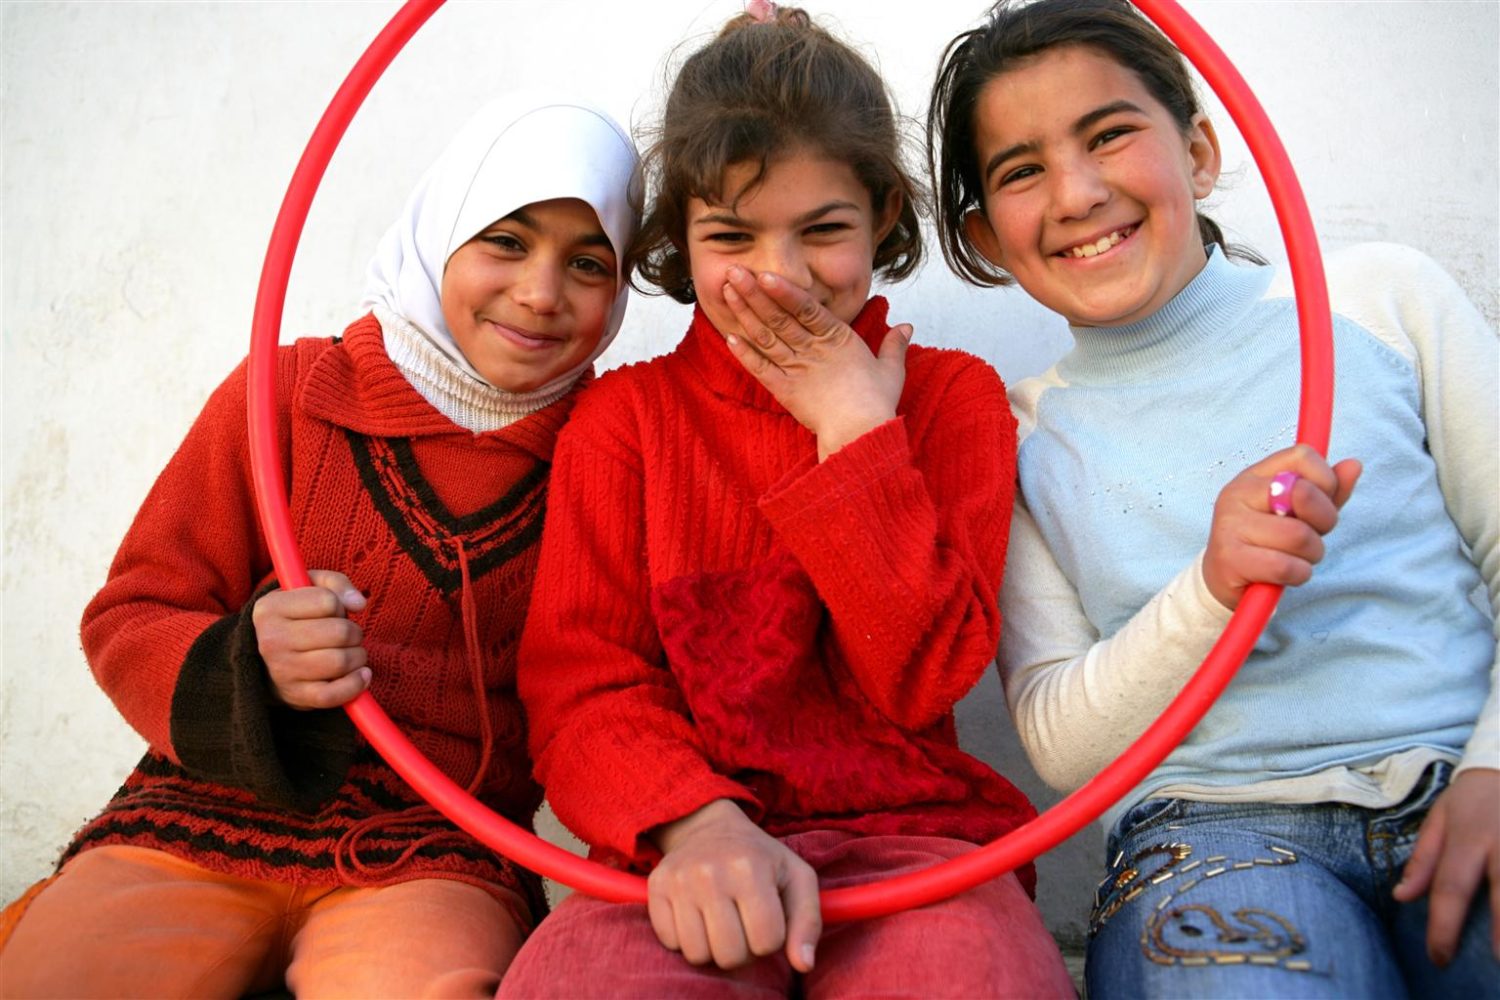 3 girls sitting down holding up a hula hoop and smiling.